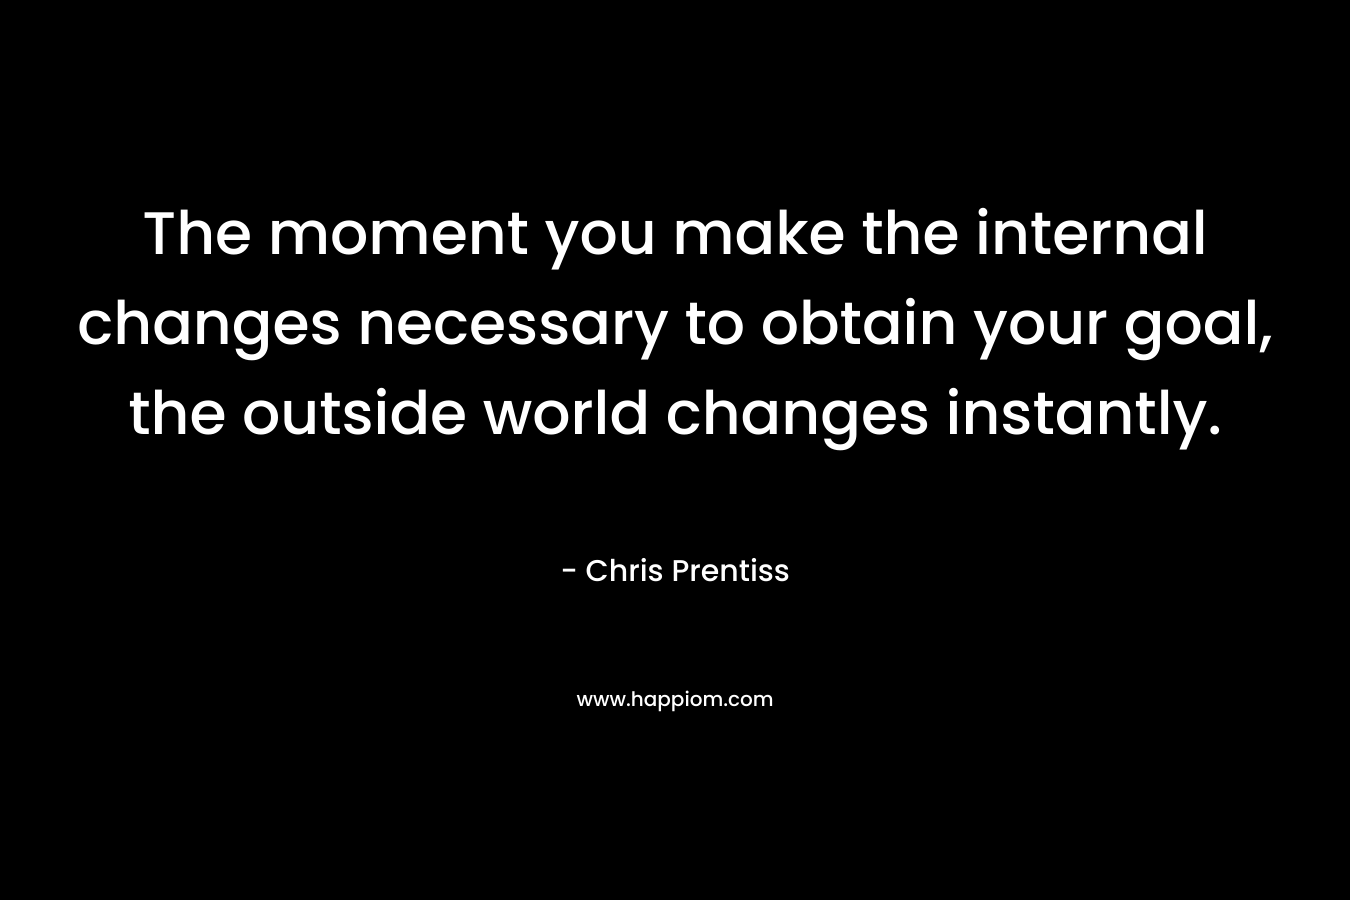 The moment you make the internal changes necessary to obtain your goal, the outside world changes instantly.